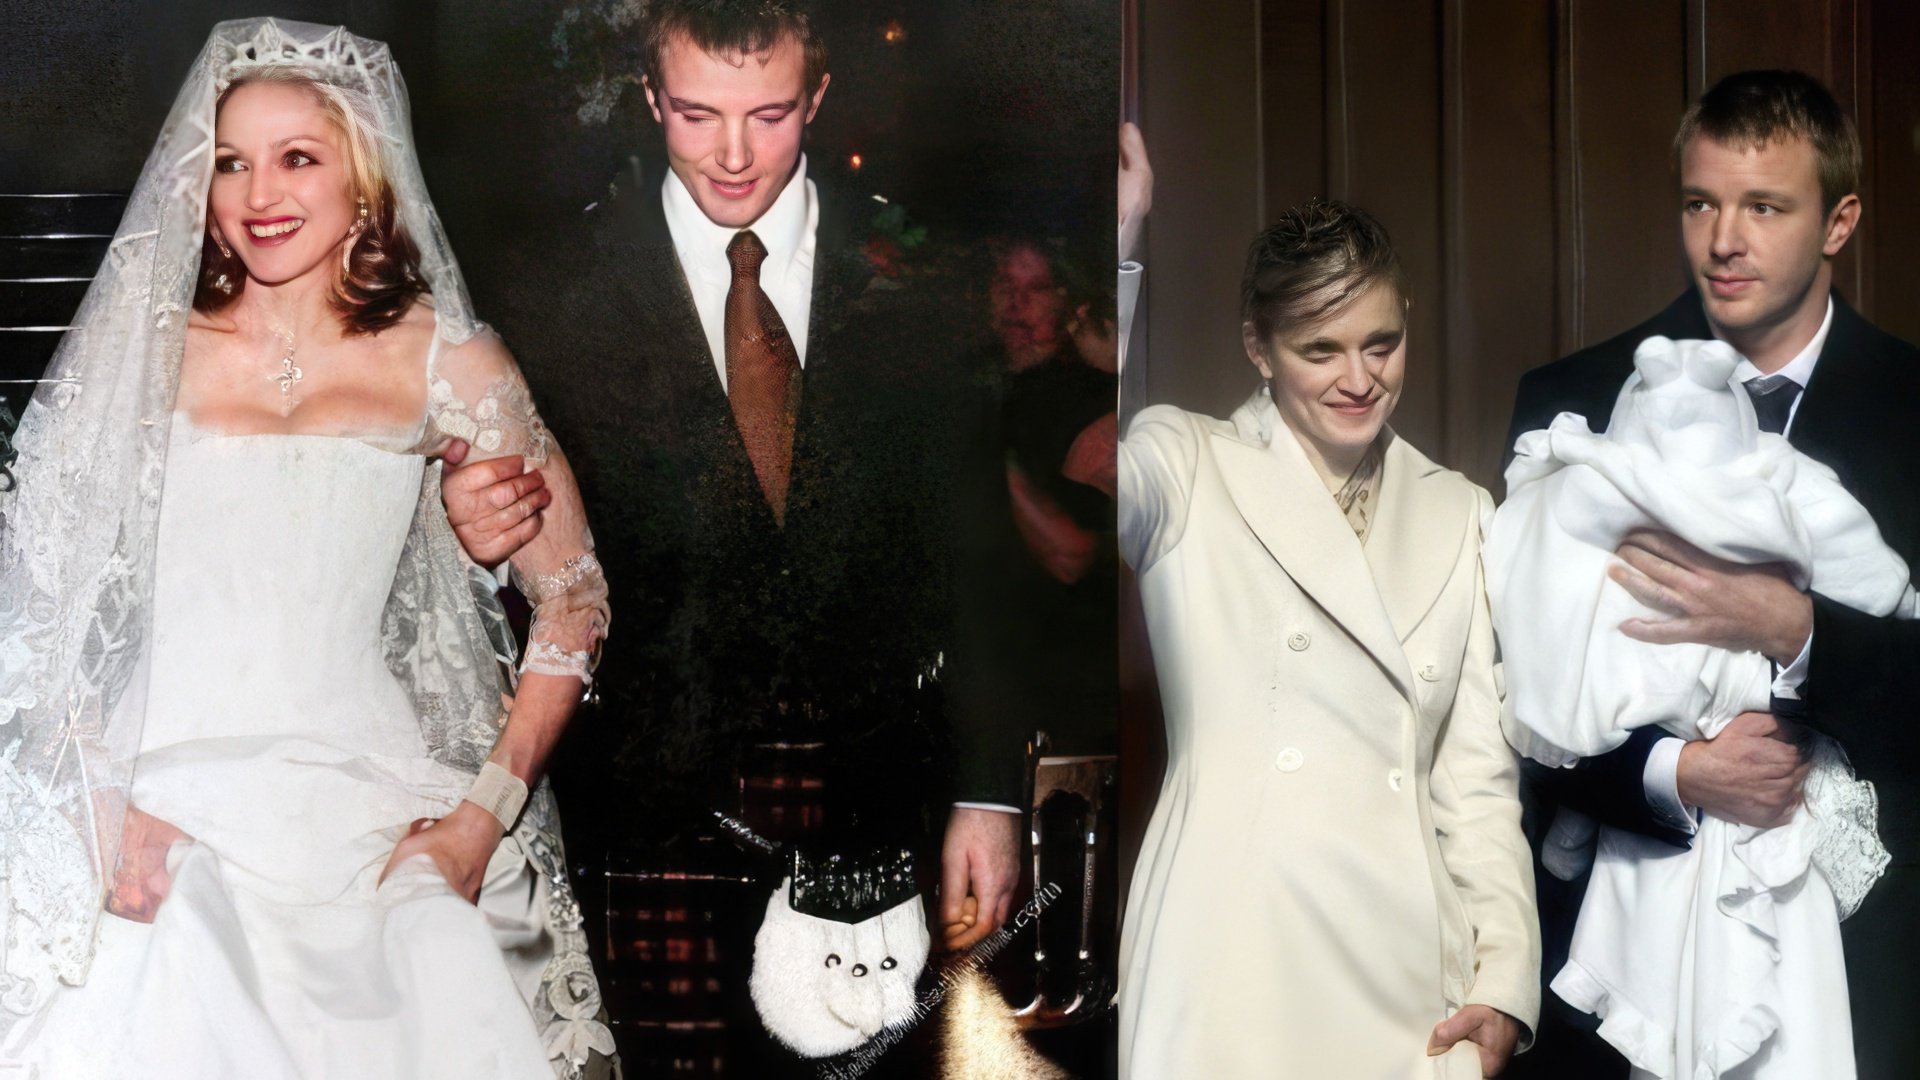 Madonna’s and Guy Ritchie’s wedding (2000)